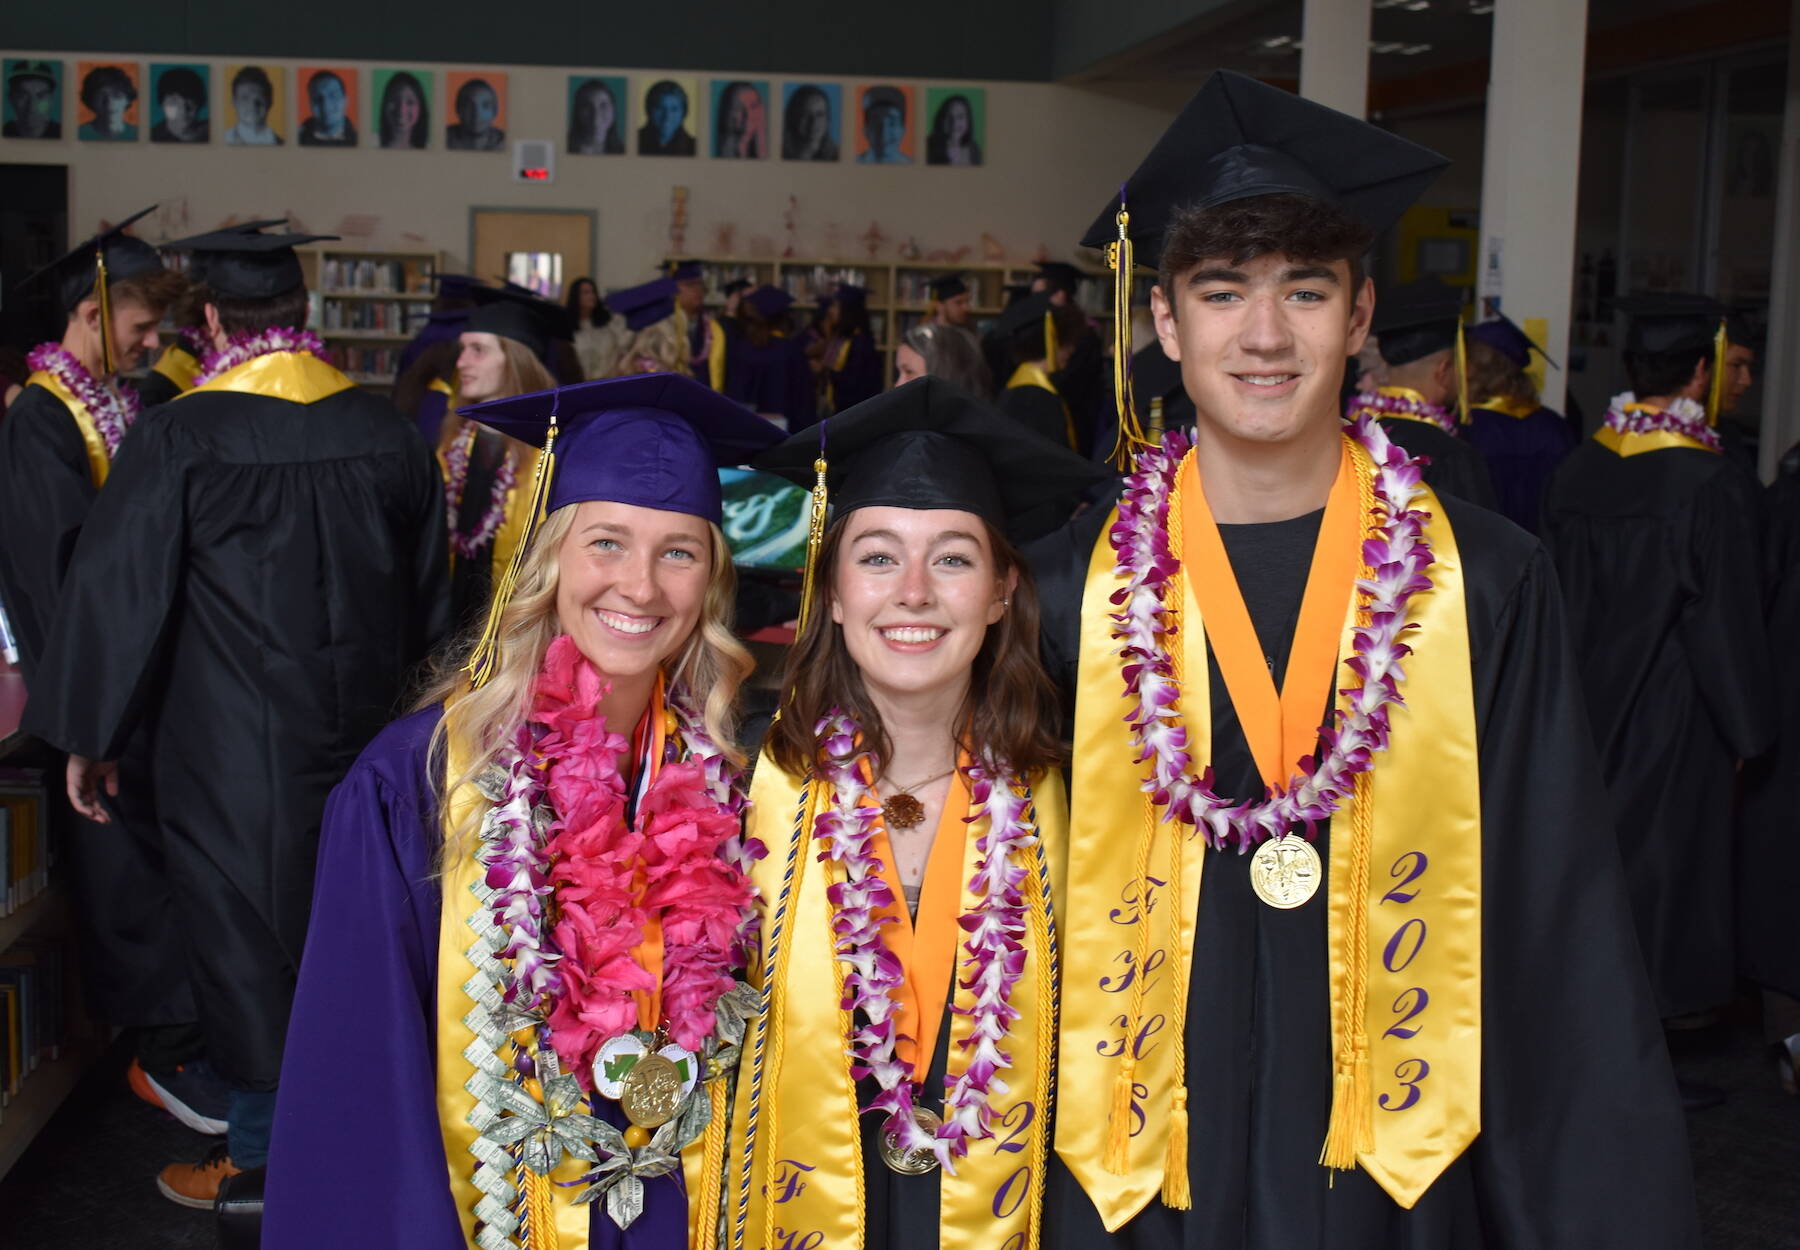 Kelley Balcomb-Bartok / staff photo
Co-Valedictorians Ariana Tucker-Bell, Islay Ross, and Zachary Place pose among their fellow seniors moments before graduation ceremonies are to commence.